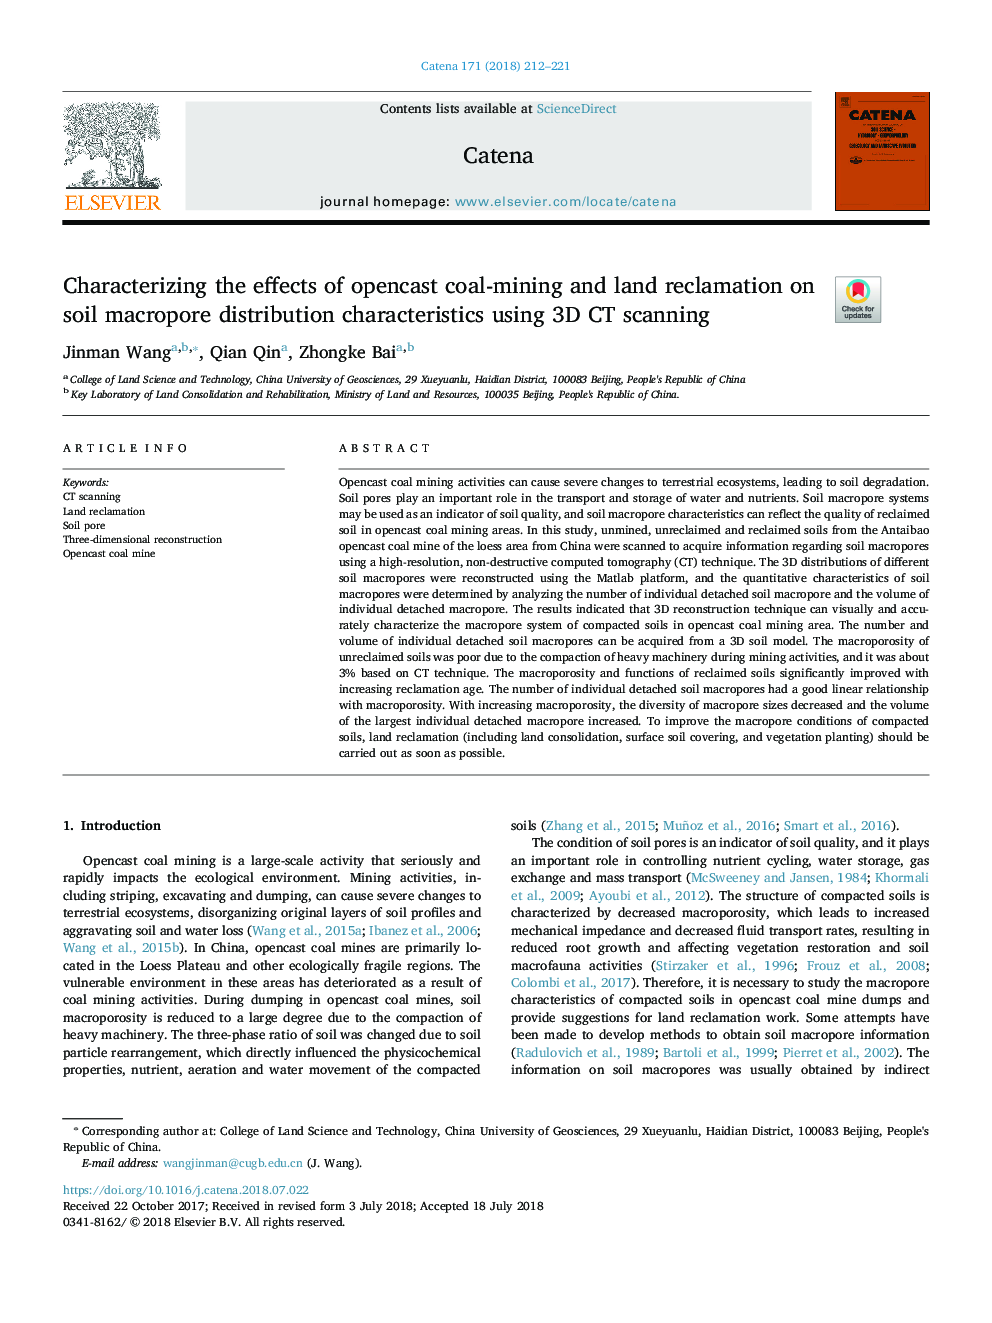 Characterizing the effects of opencast coal-mining and land reclamation on soil macropore distribution characteristics using 3D CT scanning